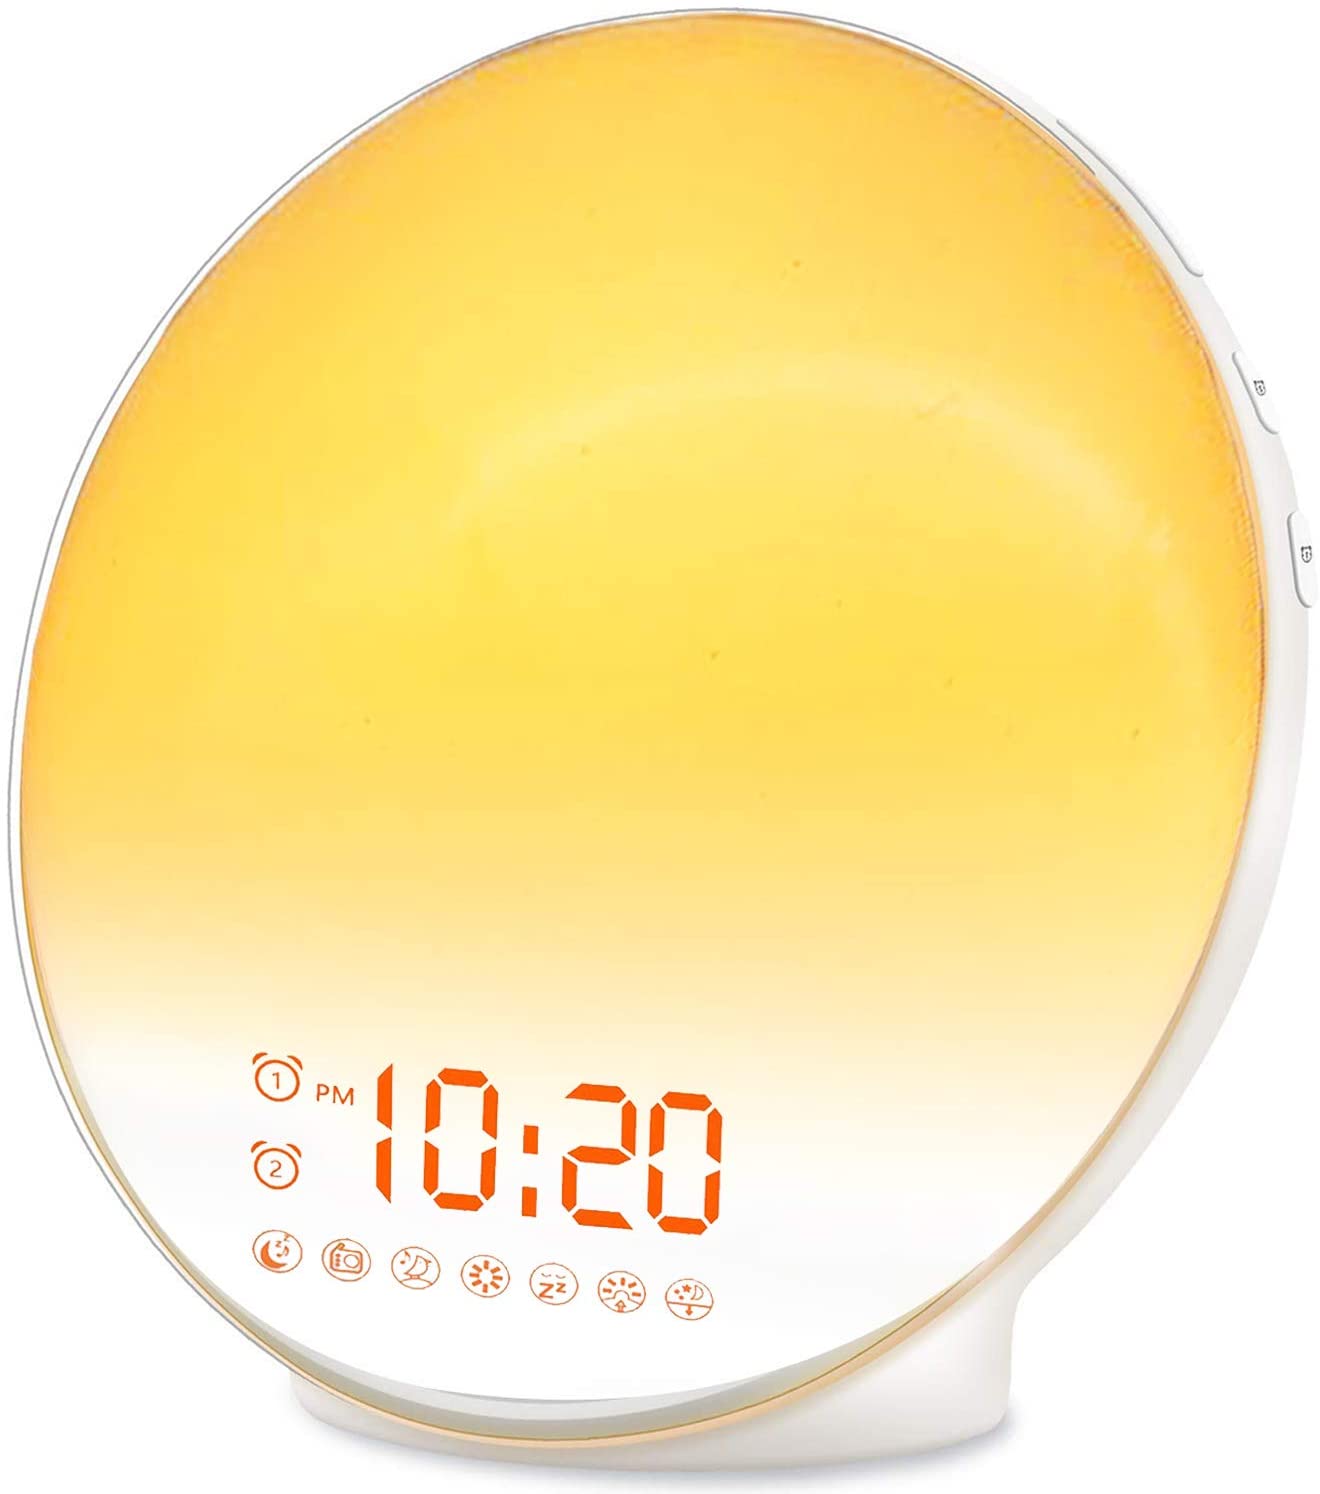 JALL Corded Electric LED Alarm Clock